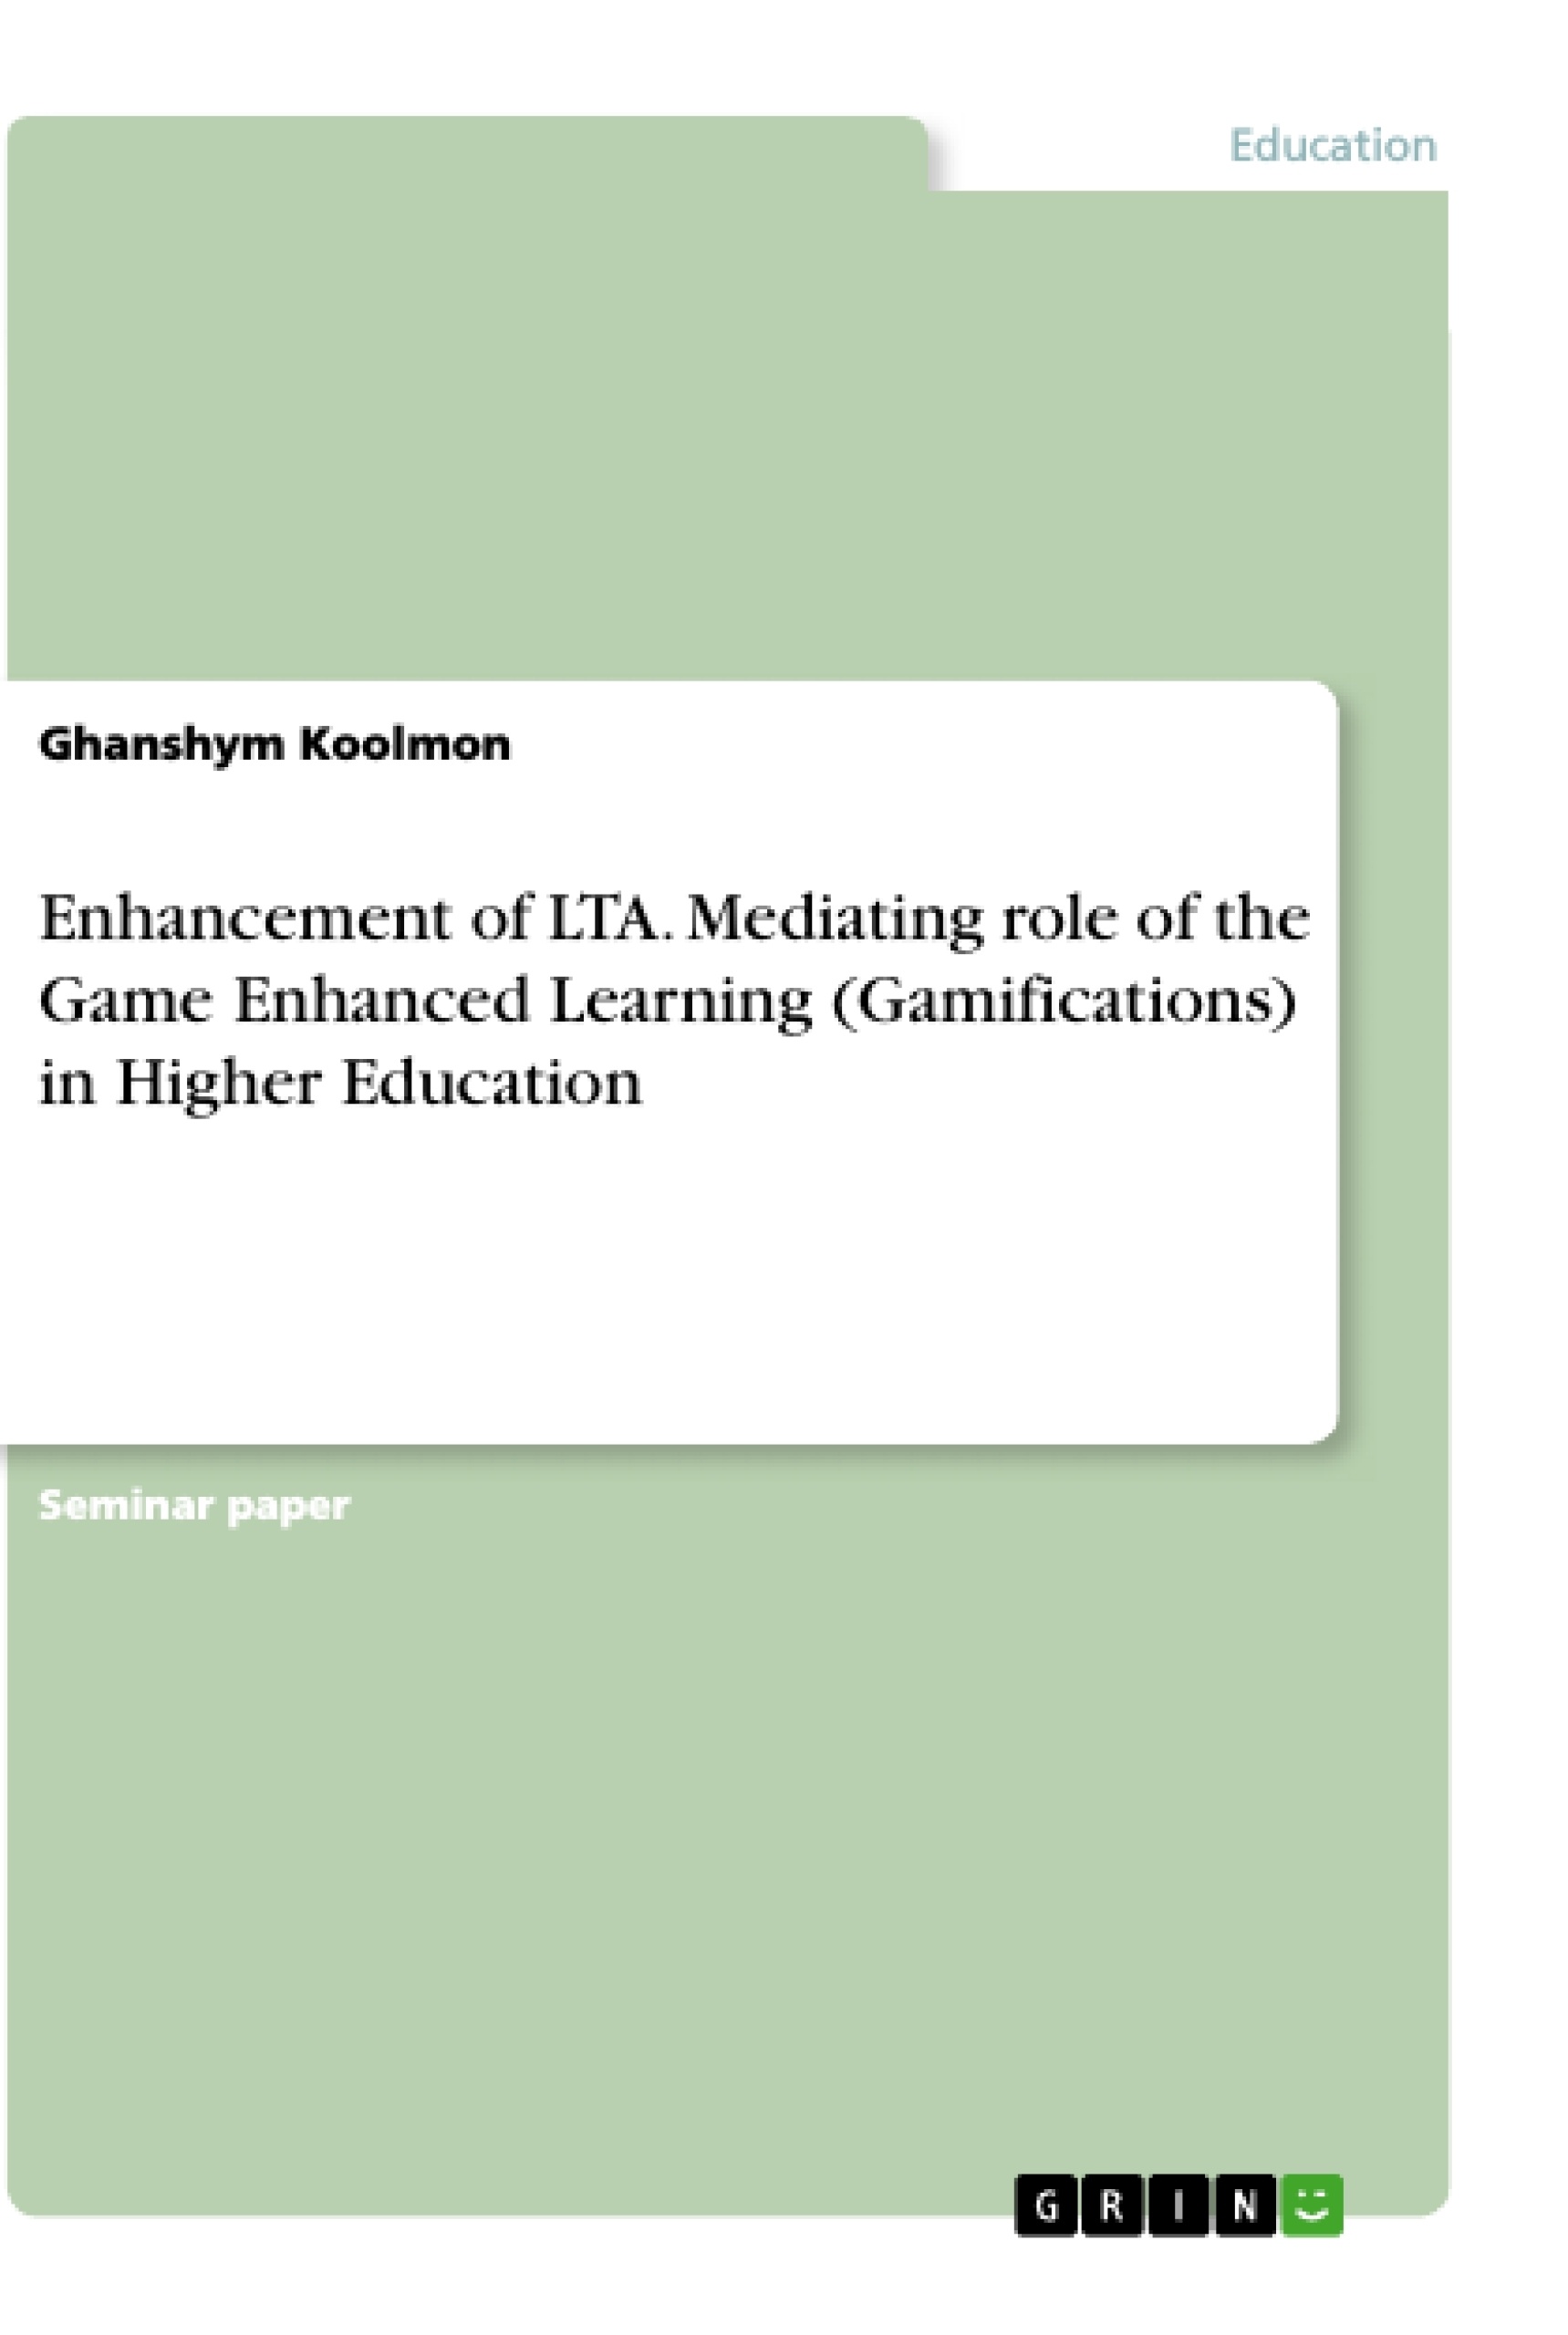 Titre: Enhancement of LTA. Mediating role of the Game Enhanced Learning (Gamifications) in Higher Education